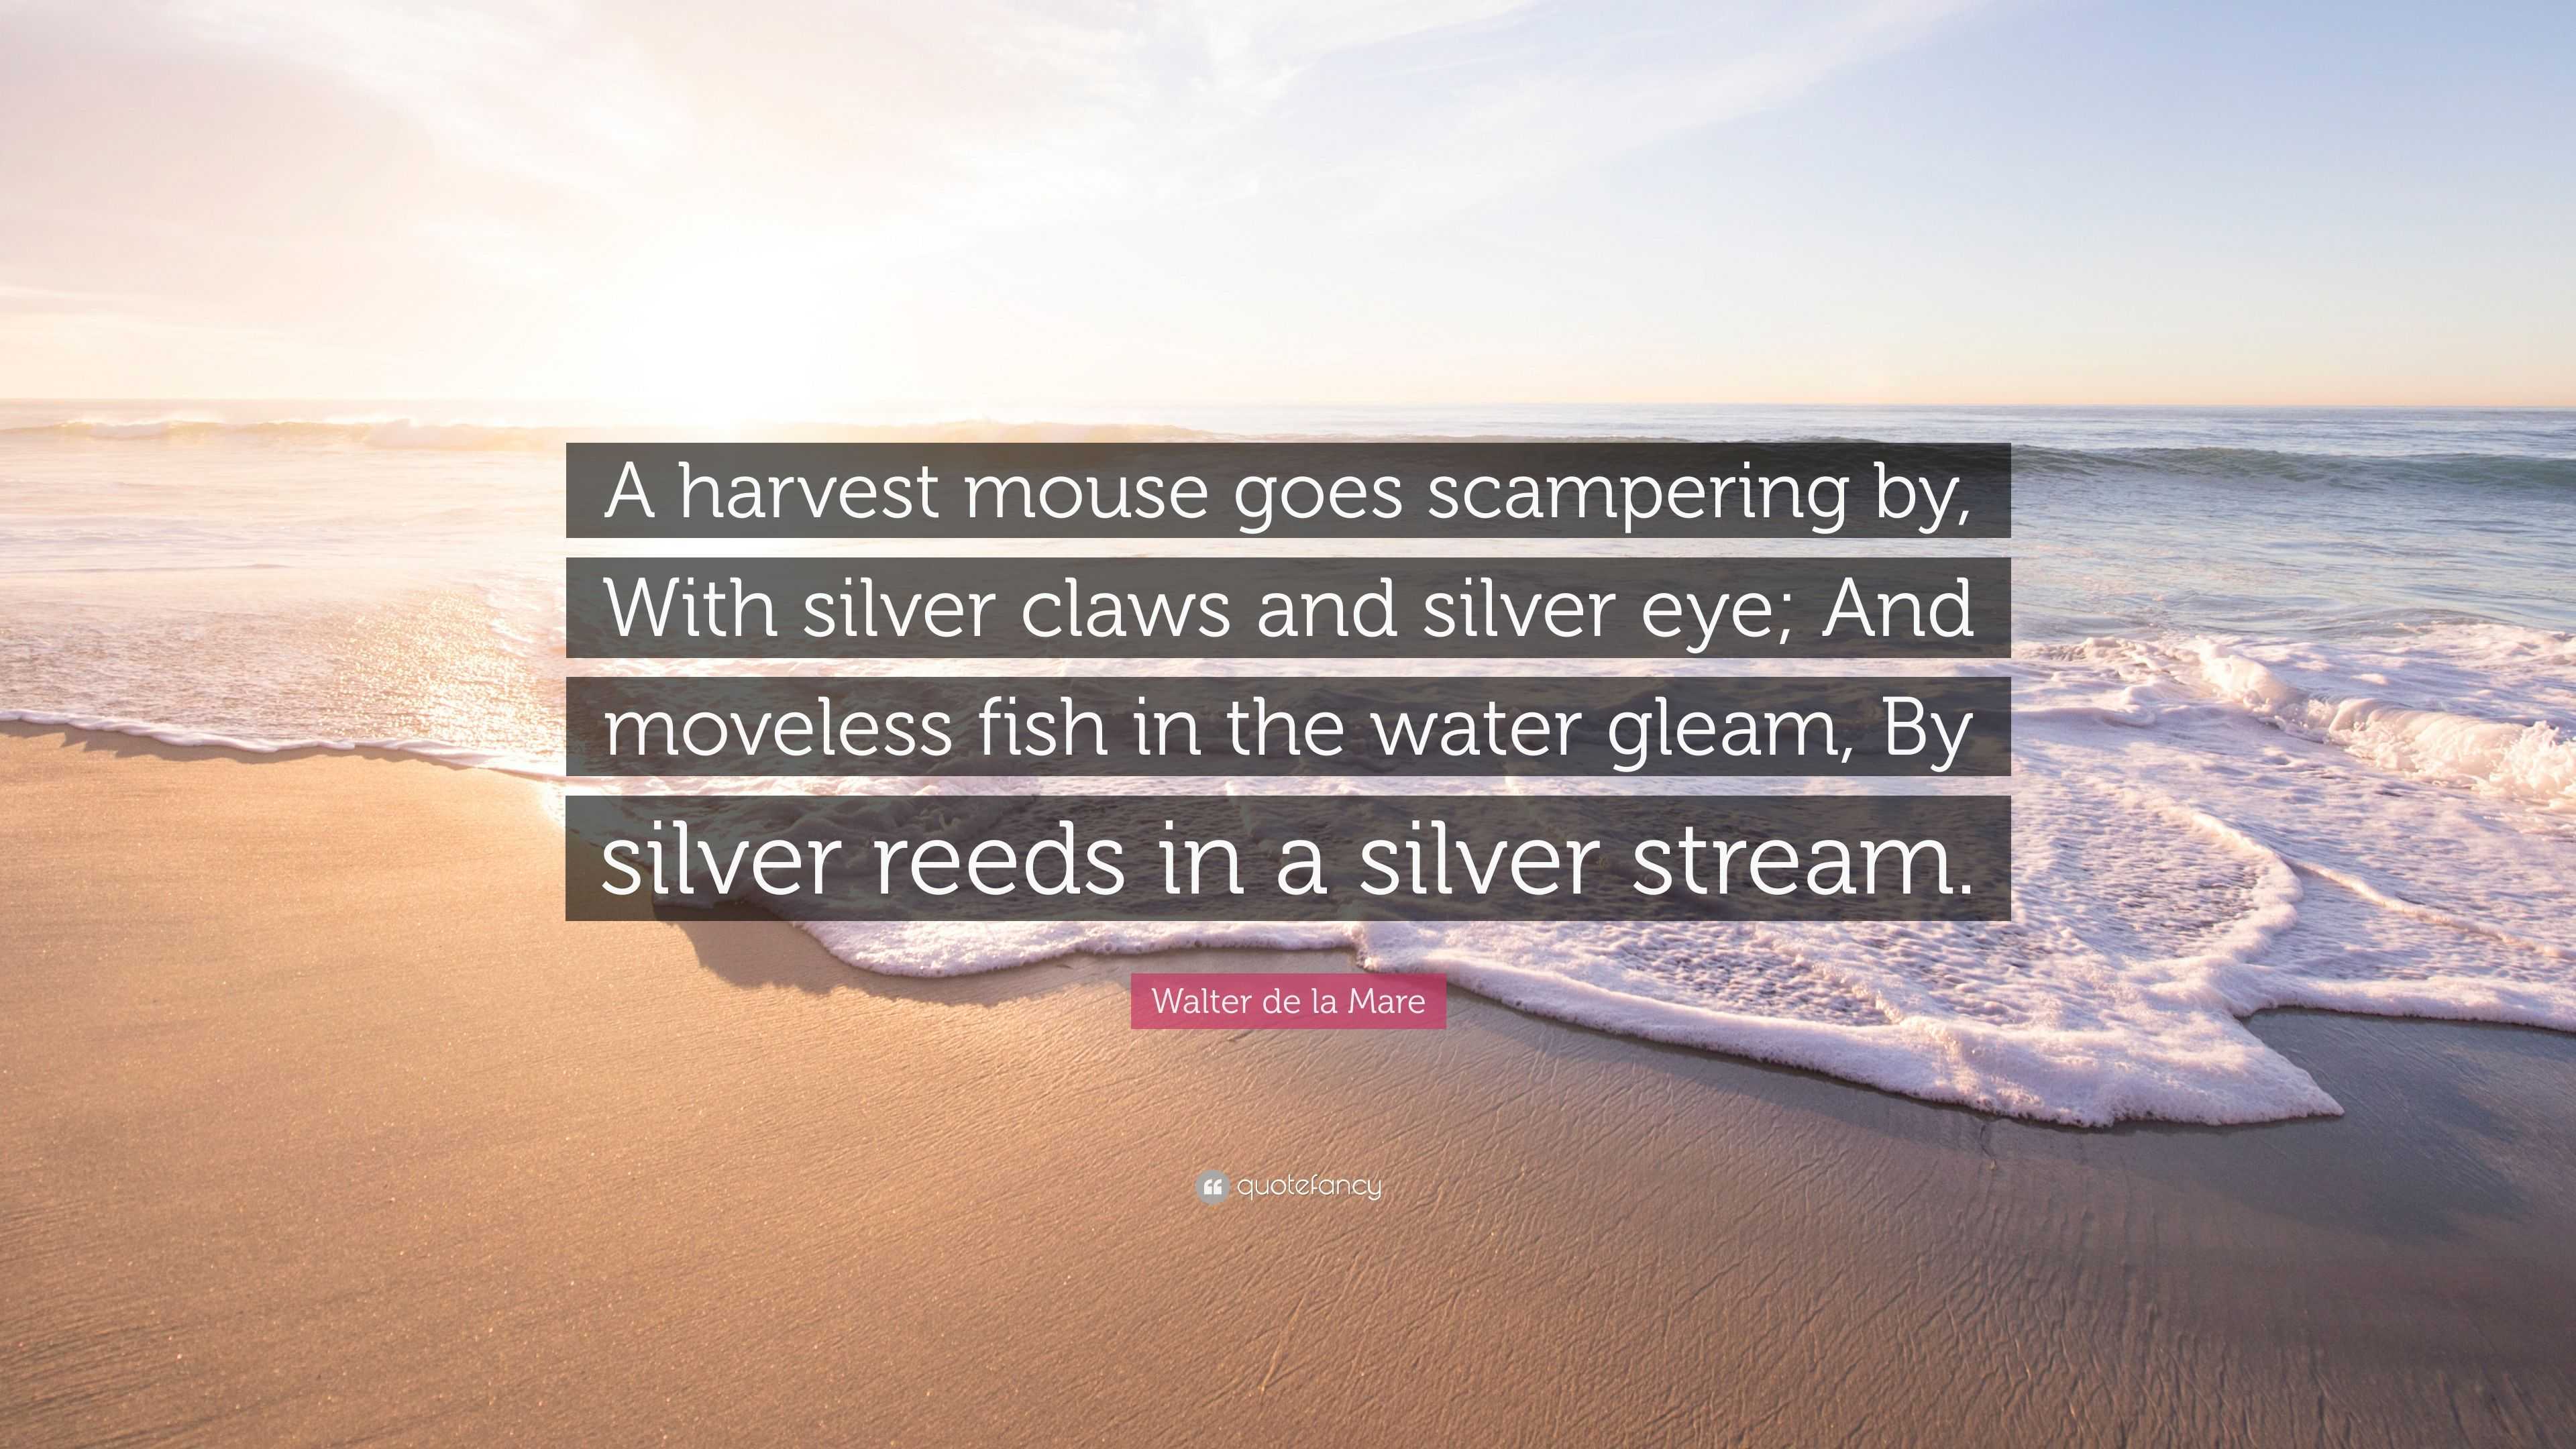 Walter de la Mare Quote: “A harvest mouse goes scampering by